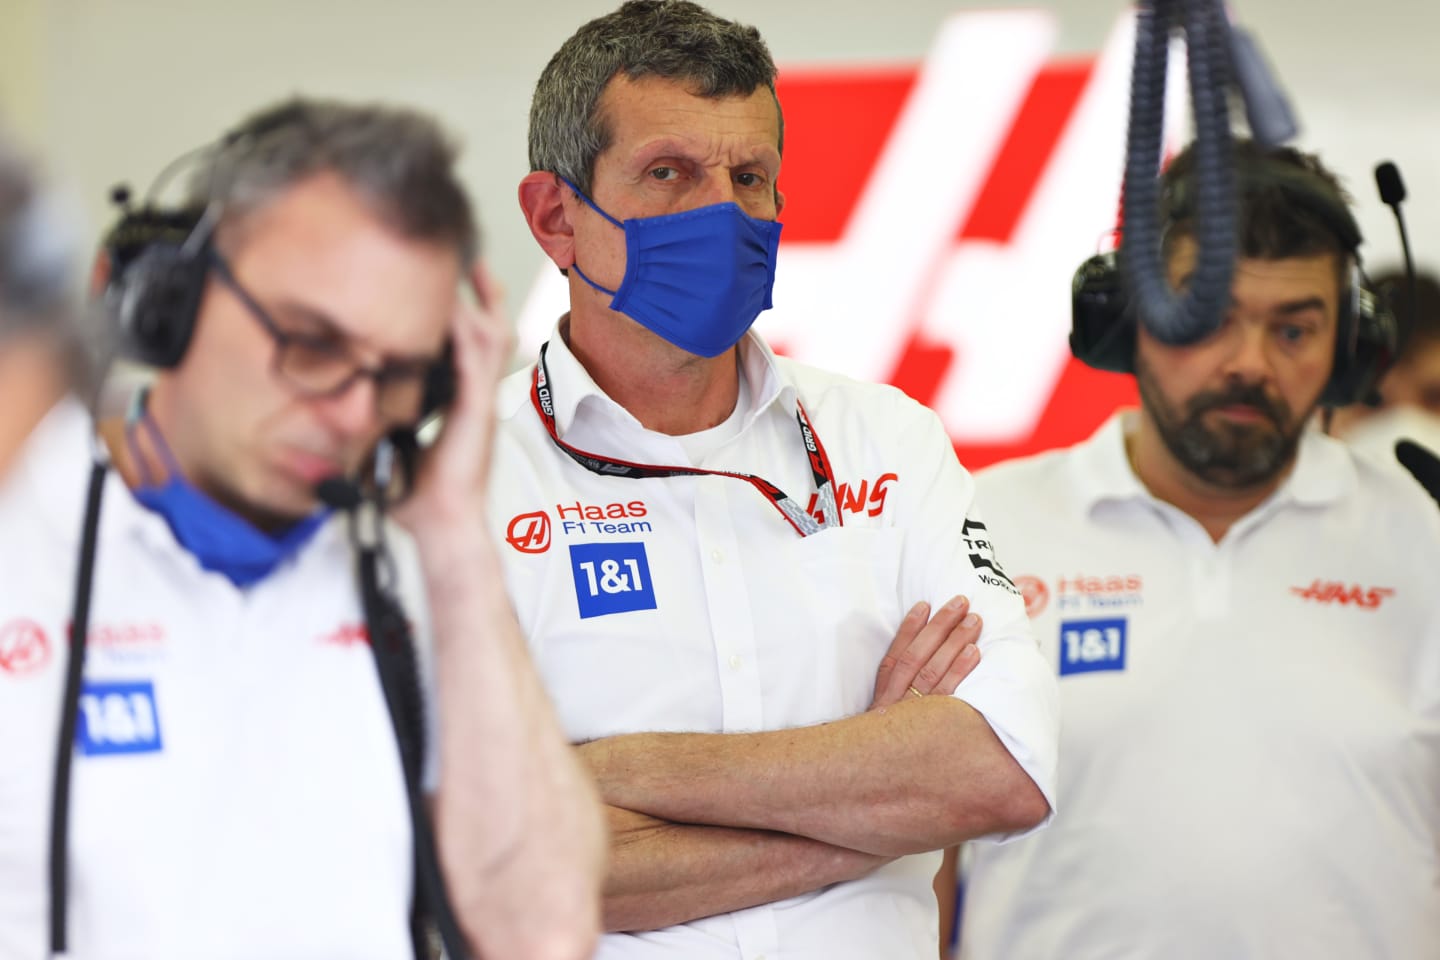 BAHRAIN, BAHRAIN - MARCH 11: Haas F1 Team Principal Guenther Steiner looks on in the garage during Day Two of F1 Testing at Bahrain International Circuit on March 11, 2022 in Bahrain, Bahrain. (Photo by Dan Istitene - Formula 1/Formula 1 via Getty Images)